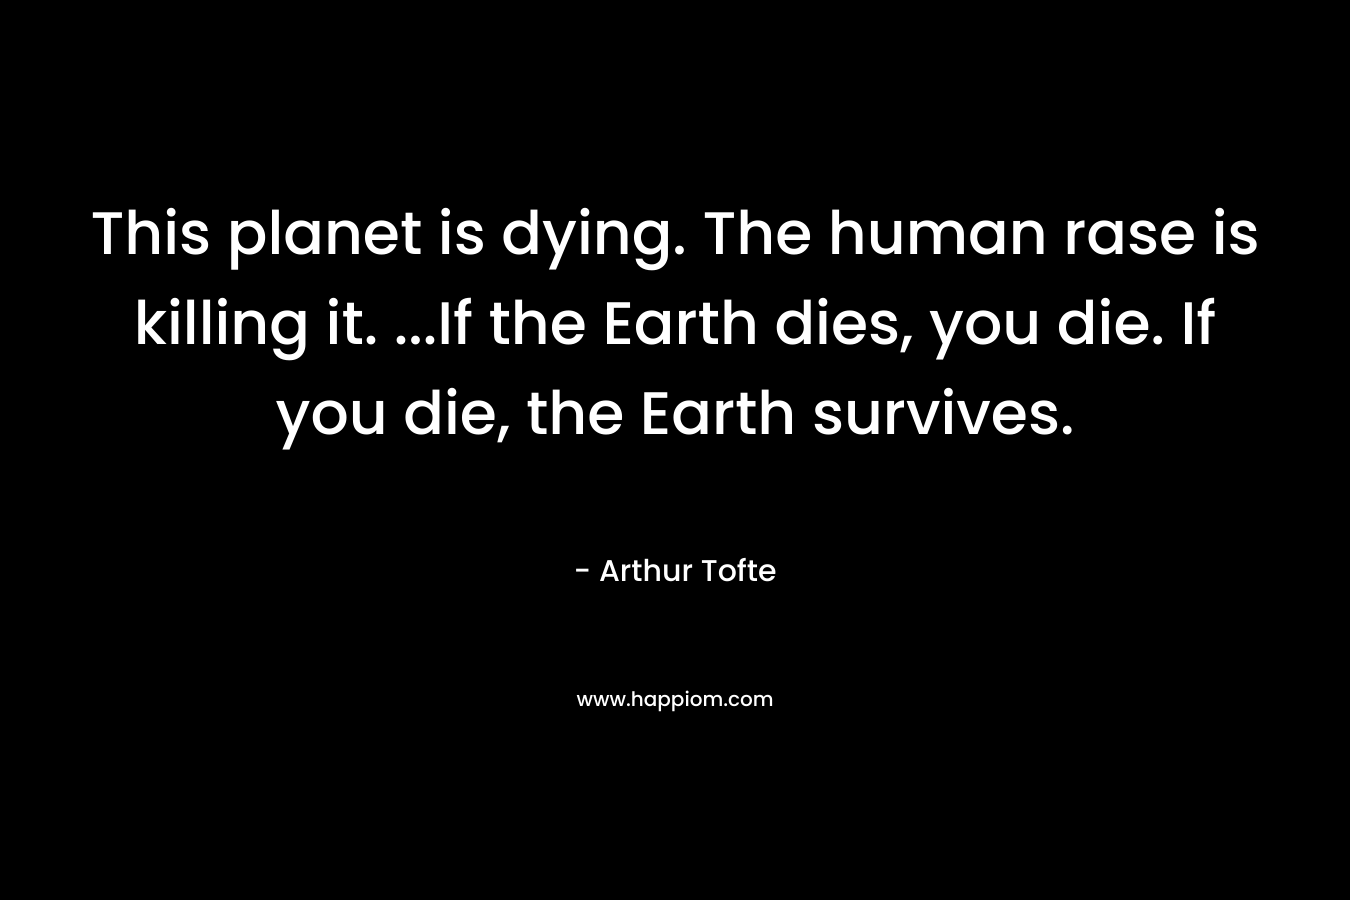 This planet is dying. The human rase is killing it. ...If the Earth dies, you die. If you die, the Earth survives.